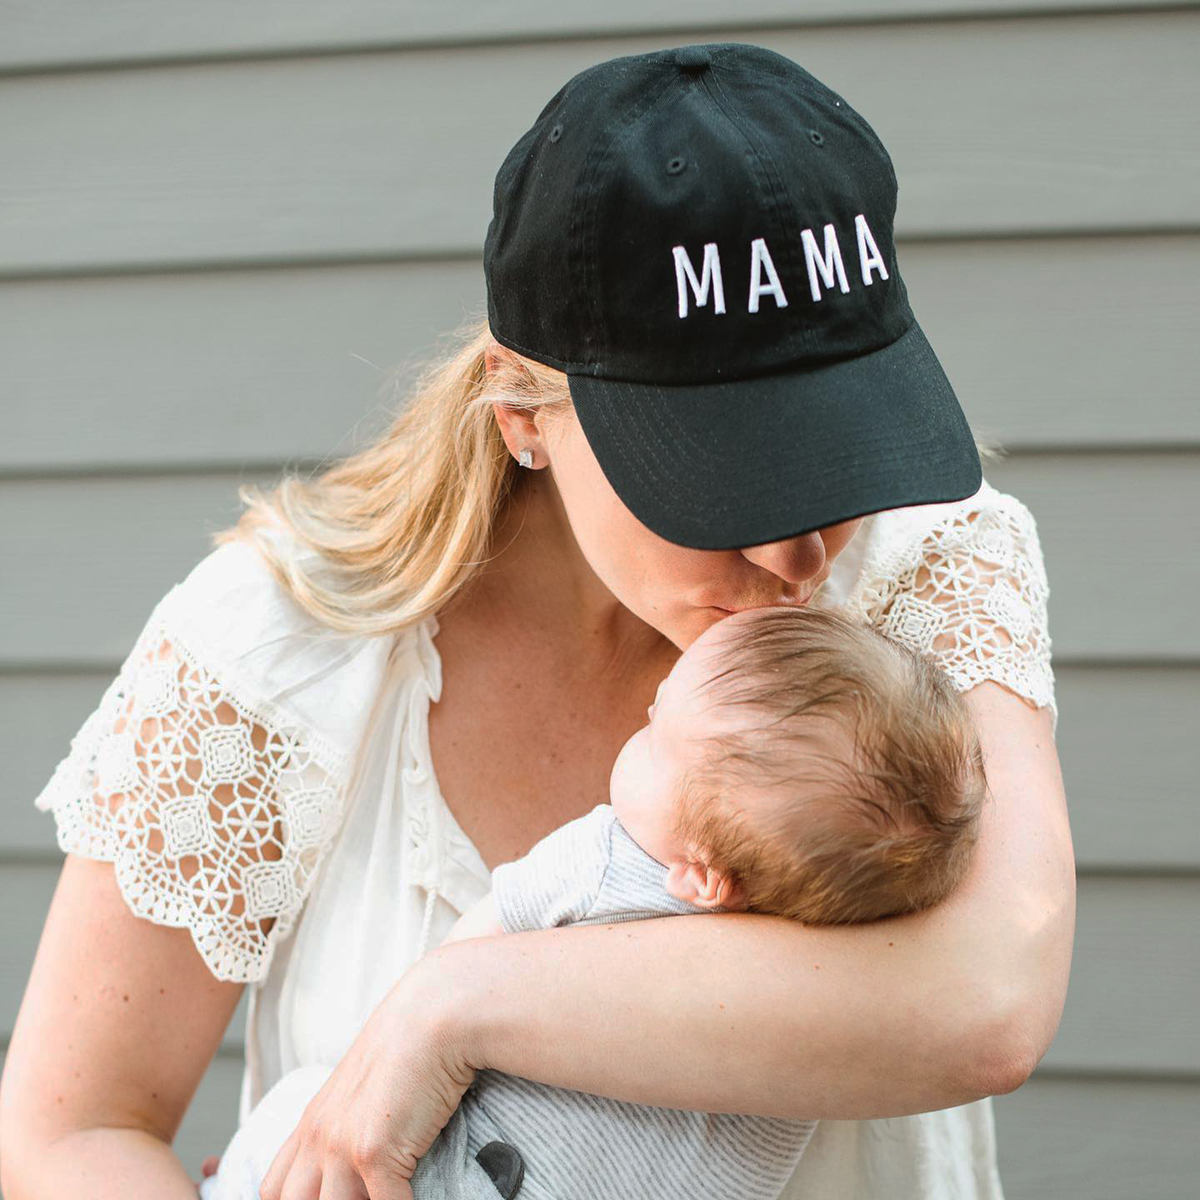 17 Amazing New Parent Gifts For Families This Holiday Season